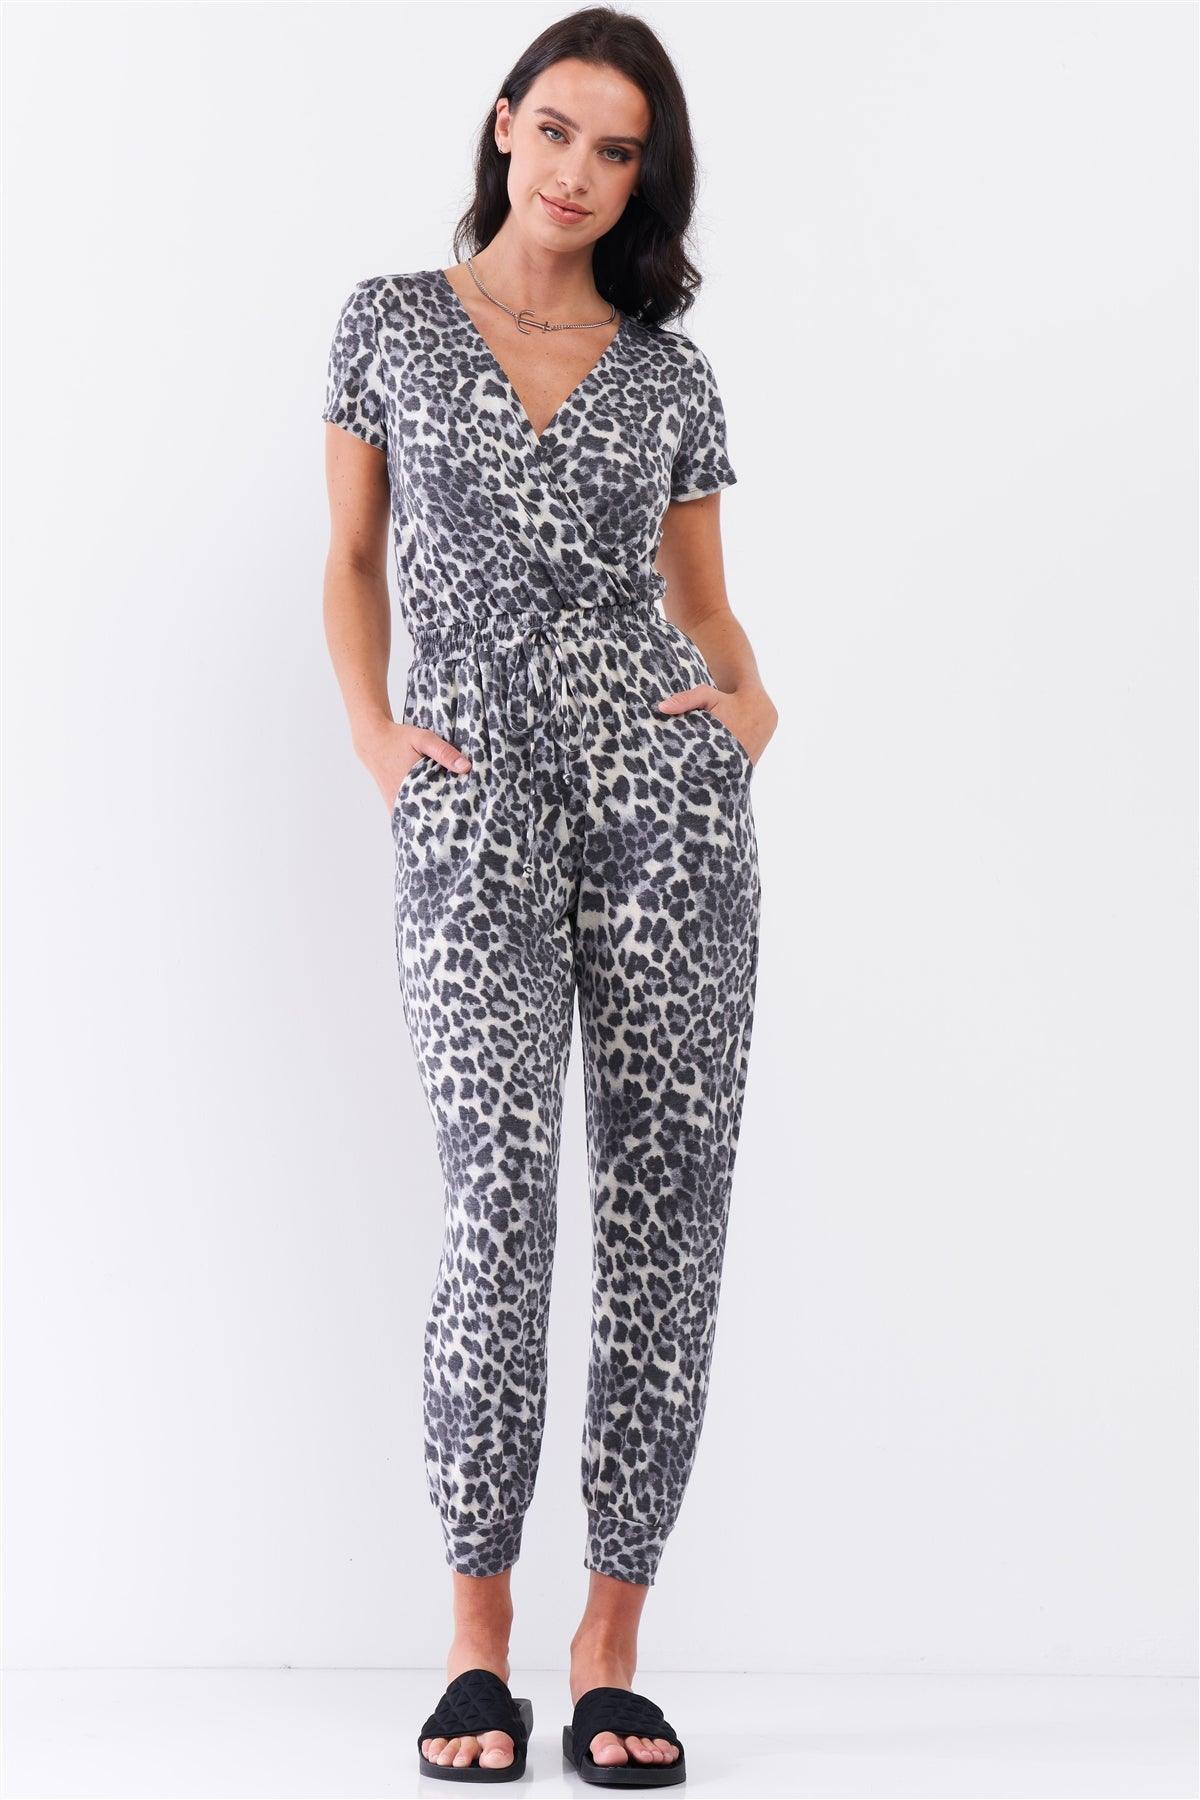 Charcoal Grey Leopard Print Short Sleeve Wrap V-Neck Draw-String Tie Waistline Relaxed Jumpsuit /3-2-1